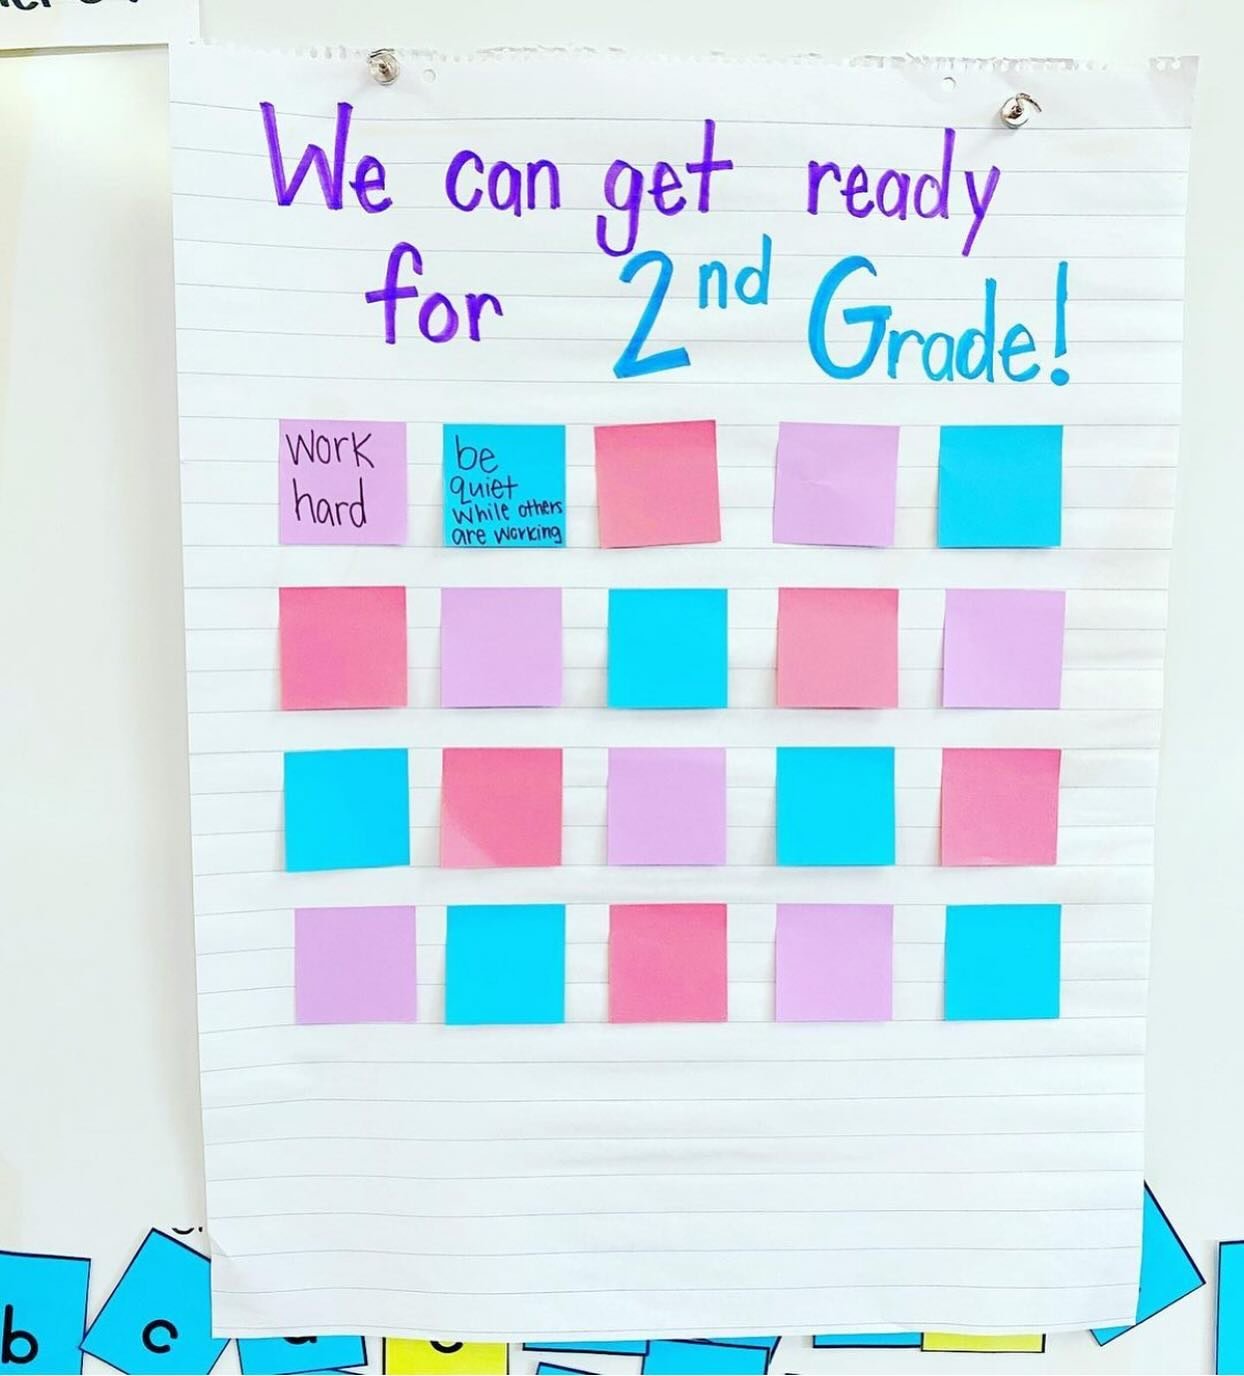 The end of April brings on the May craziness and I think it&rsquo;s time to bring out this chart again!🤪

It&rsquo;s so hard to believe my first graders will be ready for second grade soon!

We will add an expectation we can work to become 2nd grade